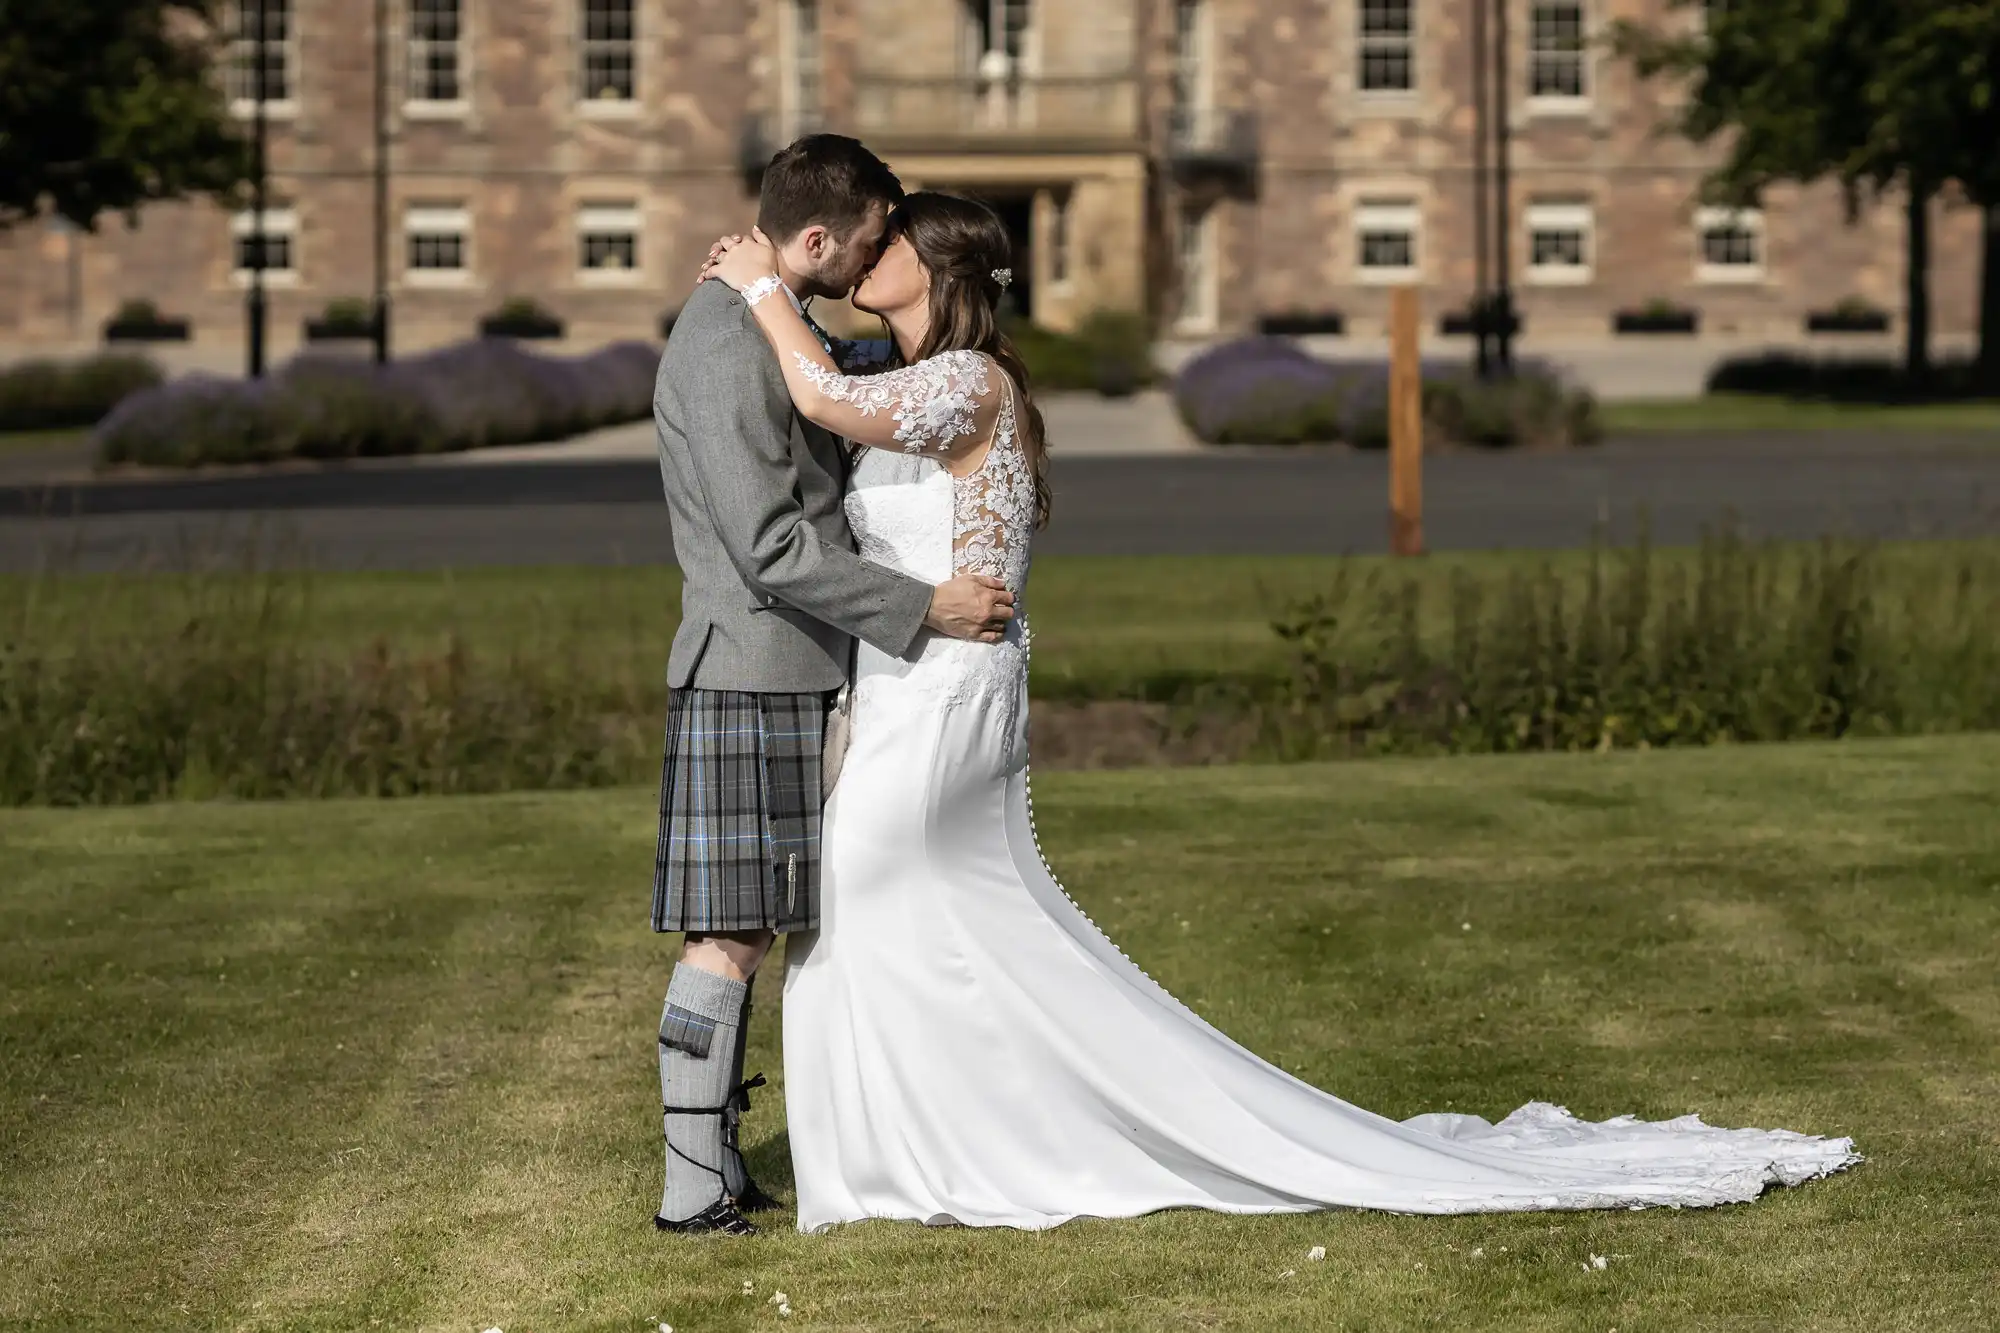 A couple embraces and kisses on a grassy lawn, with the man in a kilt and the woman in a long white wedding dress, in front of an elegant building.